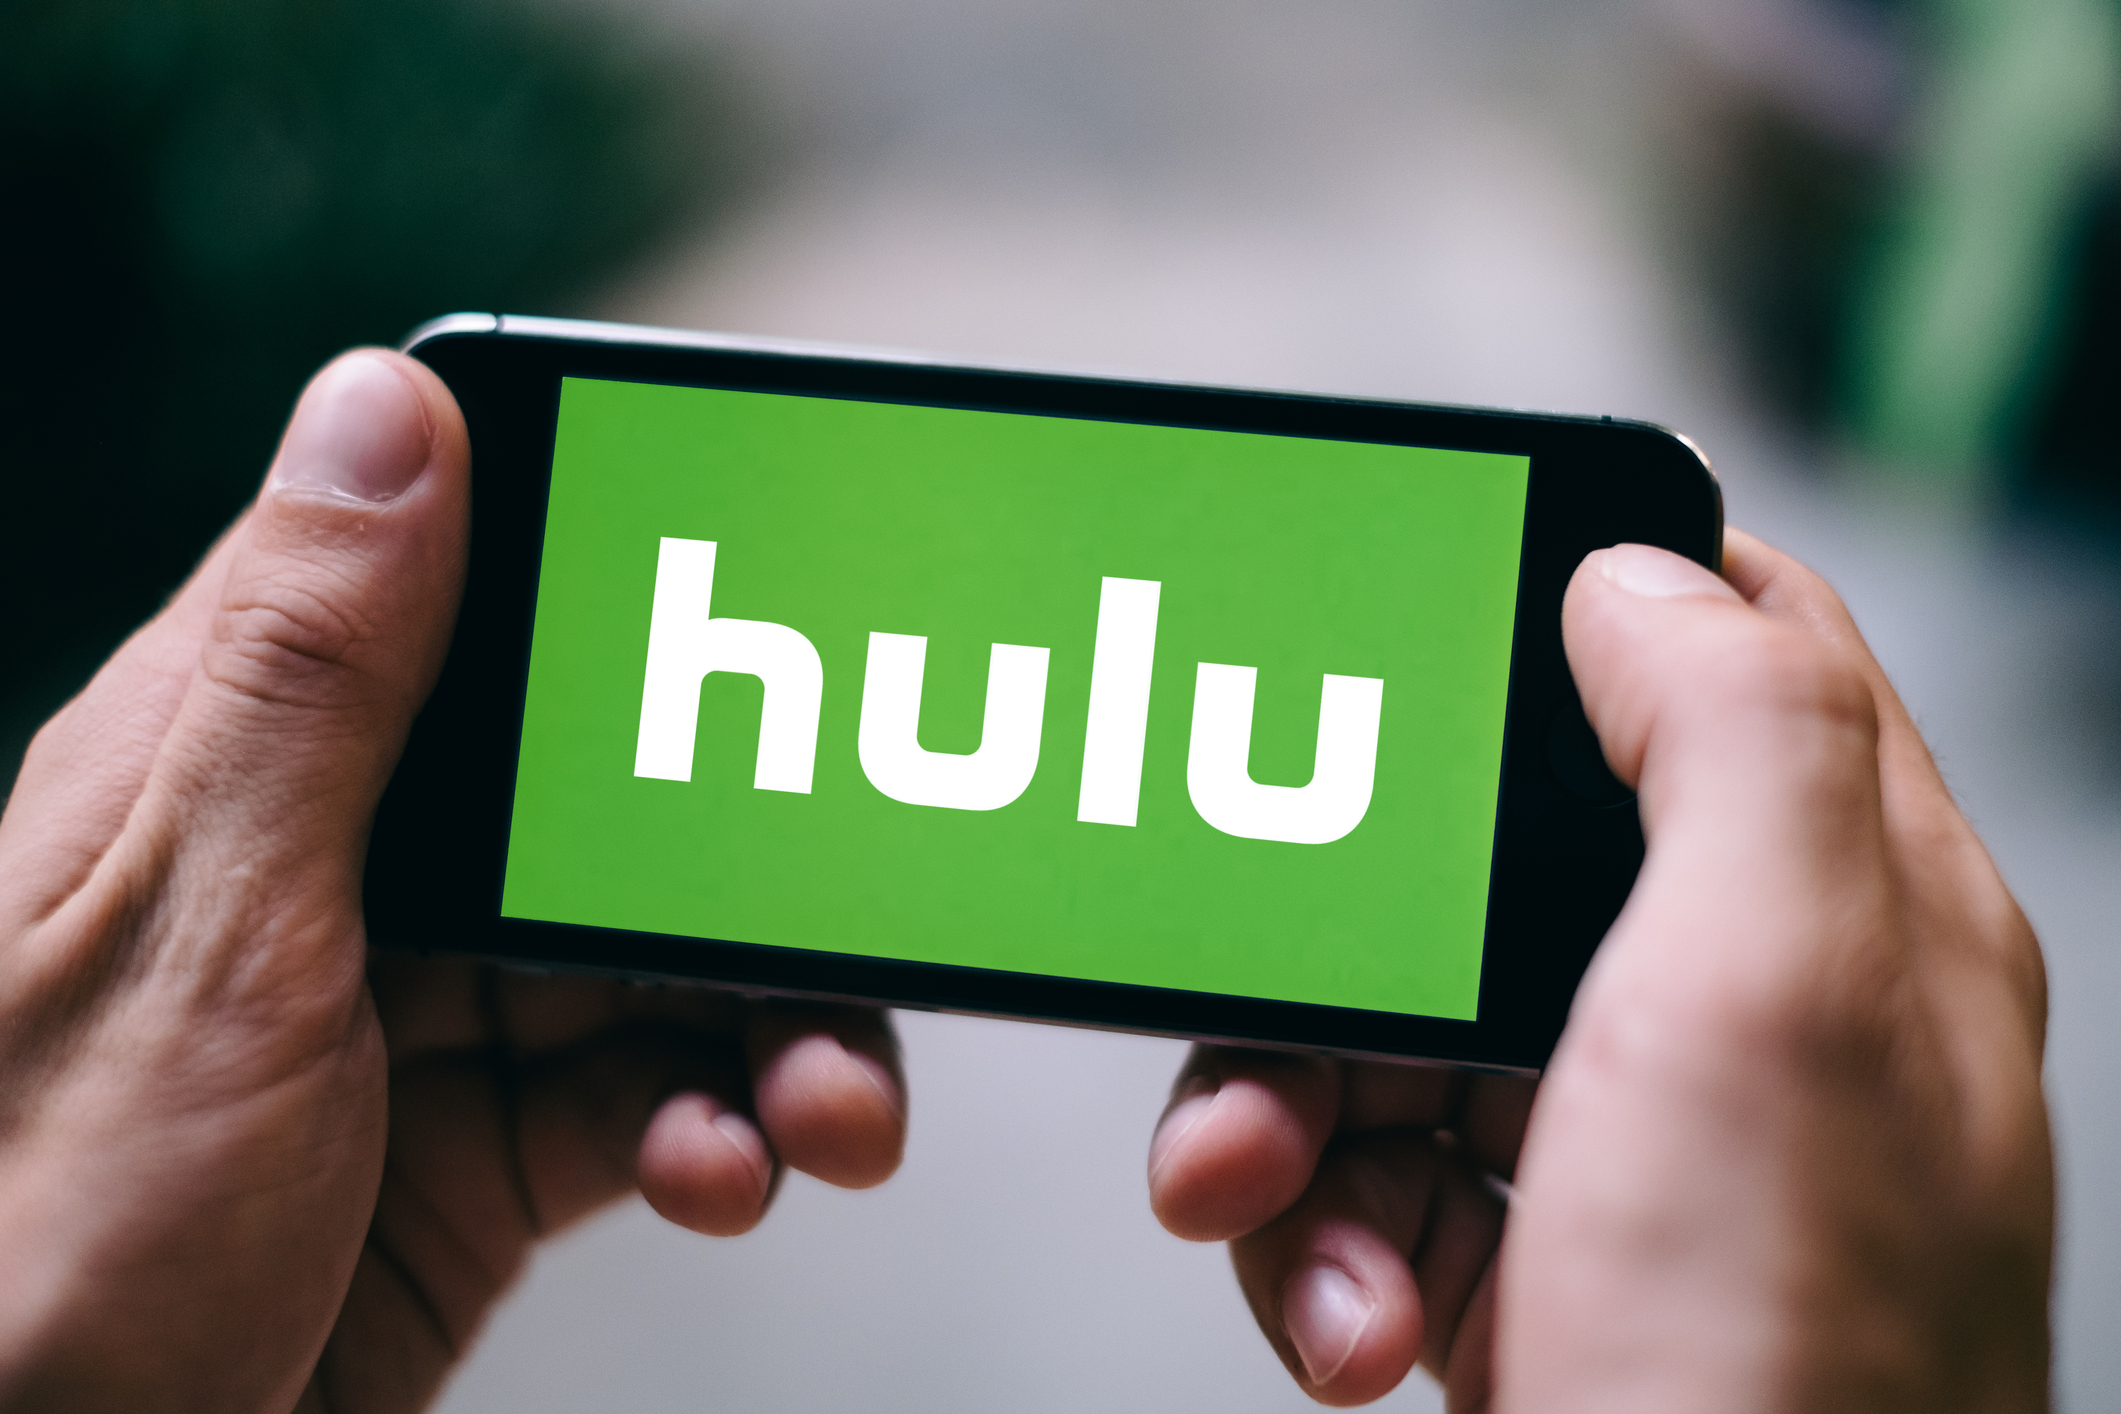 Hulu sale: Pay $0.99 per month for 12 months